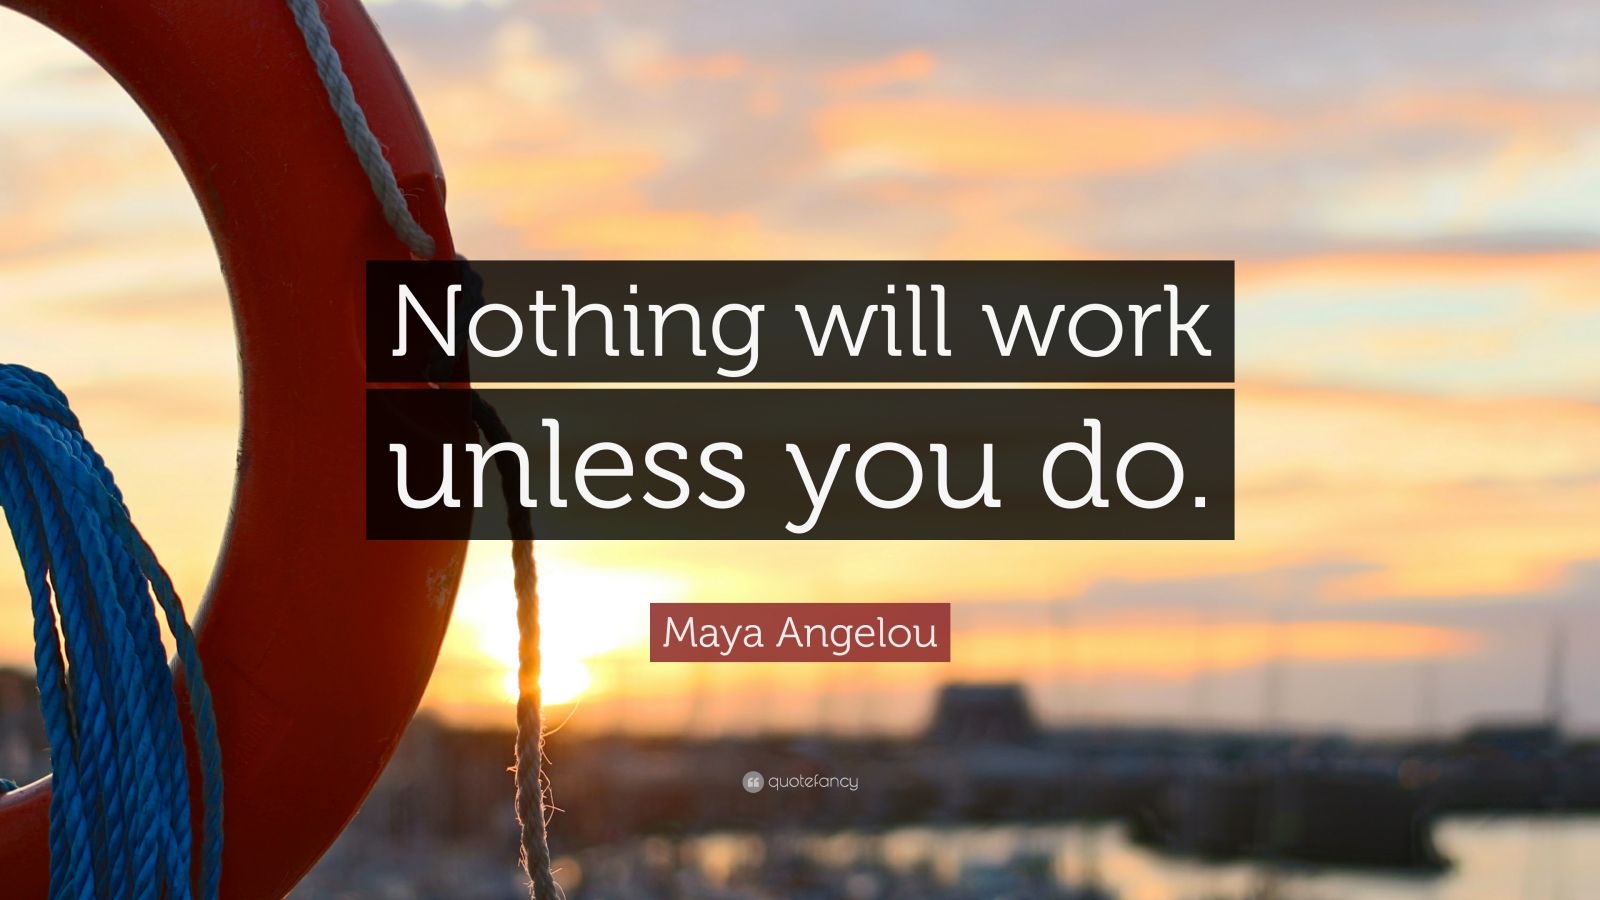 Maya Angelou Quote: “Nothing will work unless you do.” (28 wallpapers